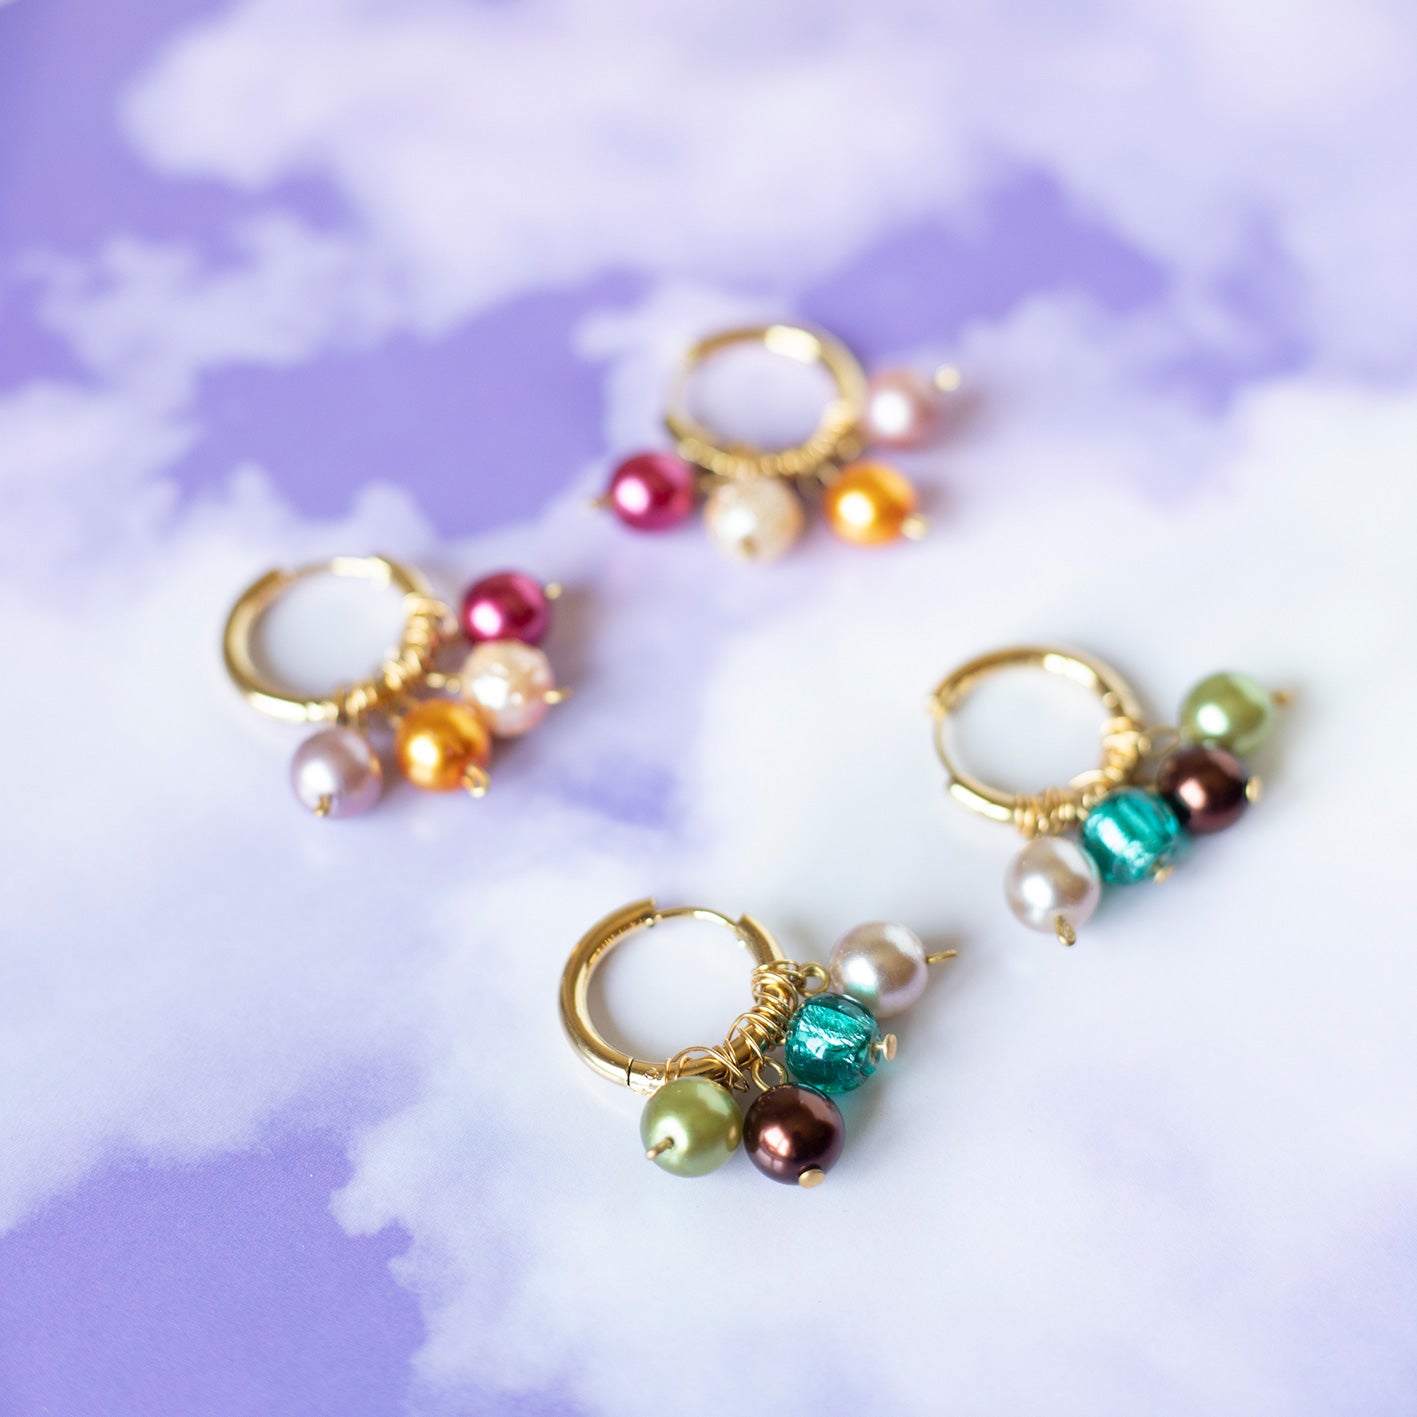 Hoop earrings in gold-plated steel and colored glass beads